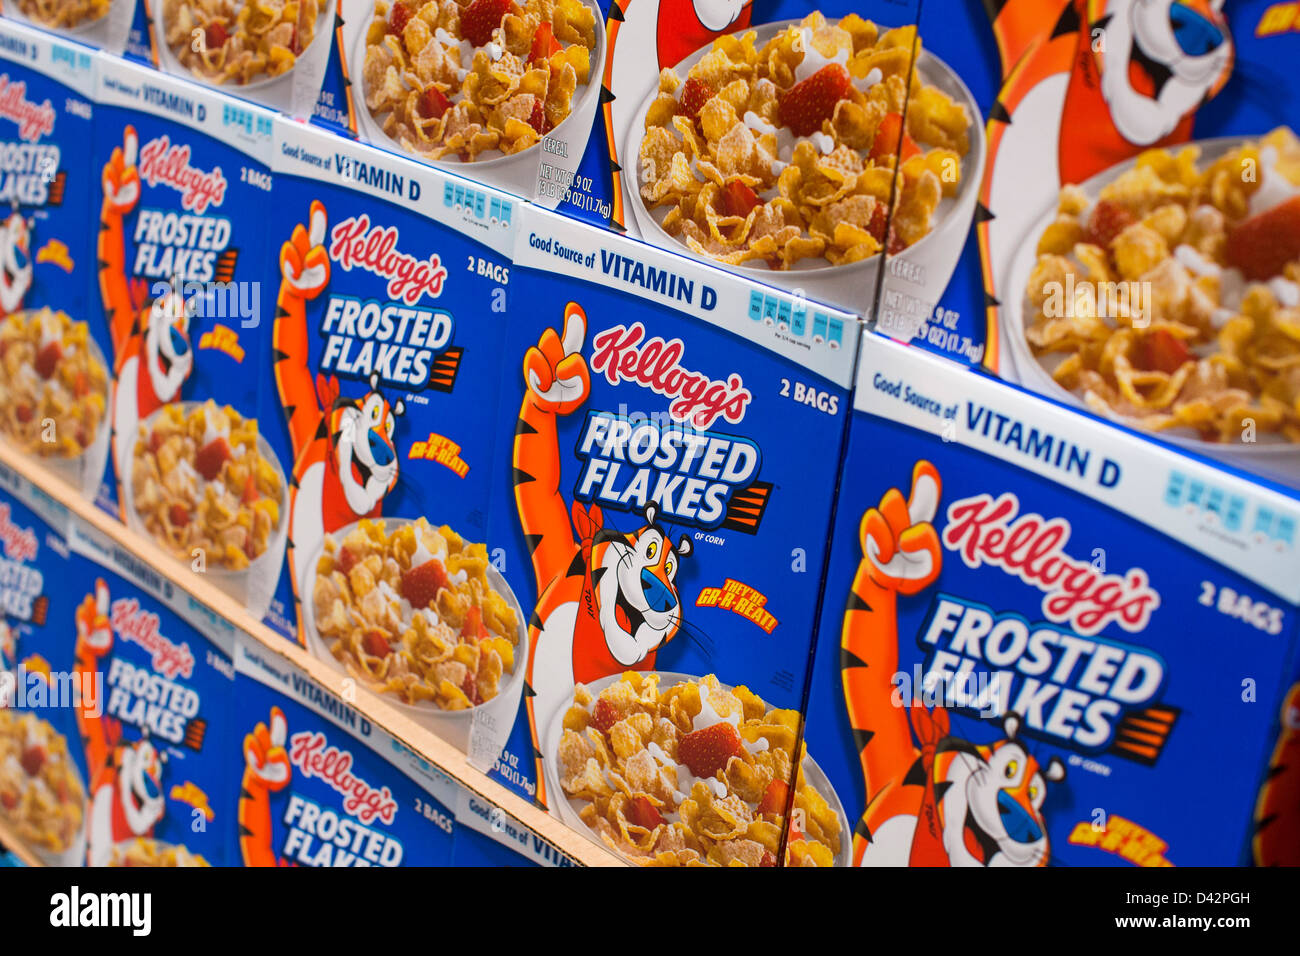 Kellog's Frosted Flakes cereal on display at a Costco Wholesale Warehouse Club. Stock Photo